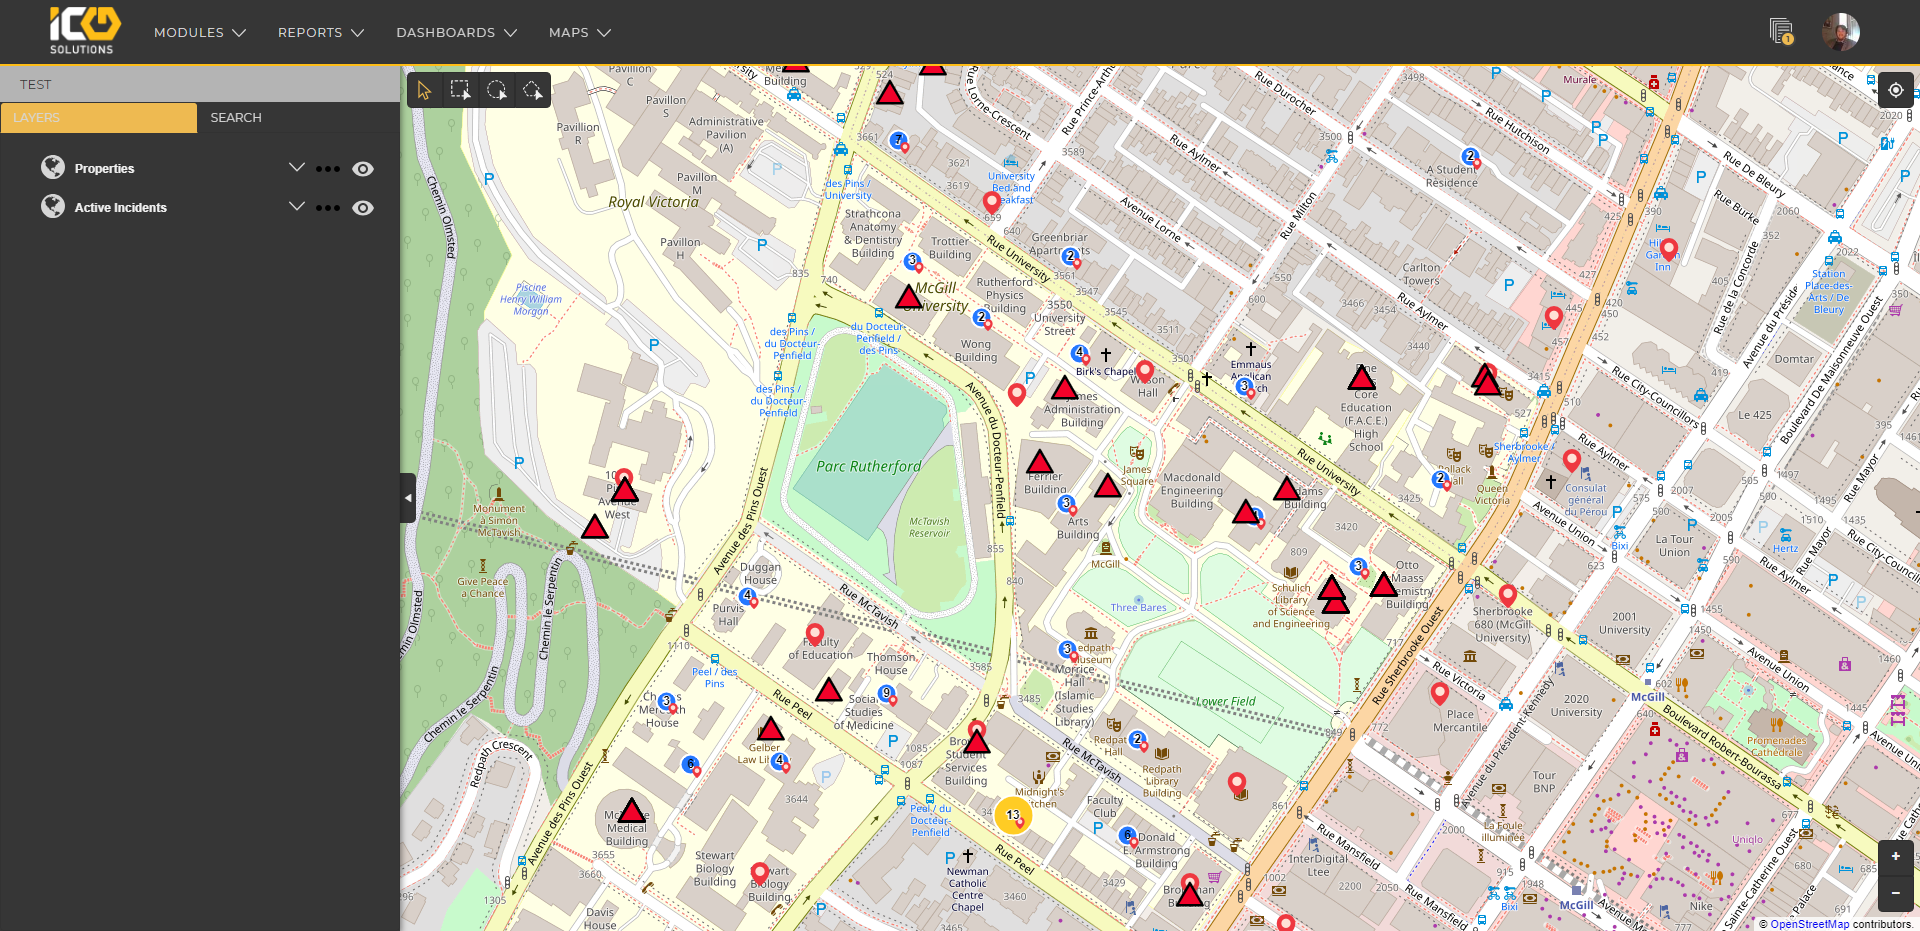 Screenshot of map displaying current and past incidents and requests.